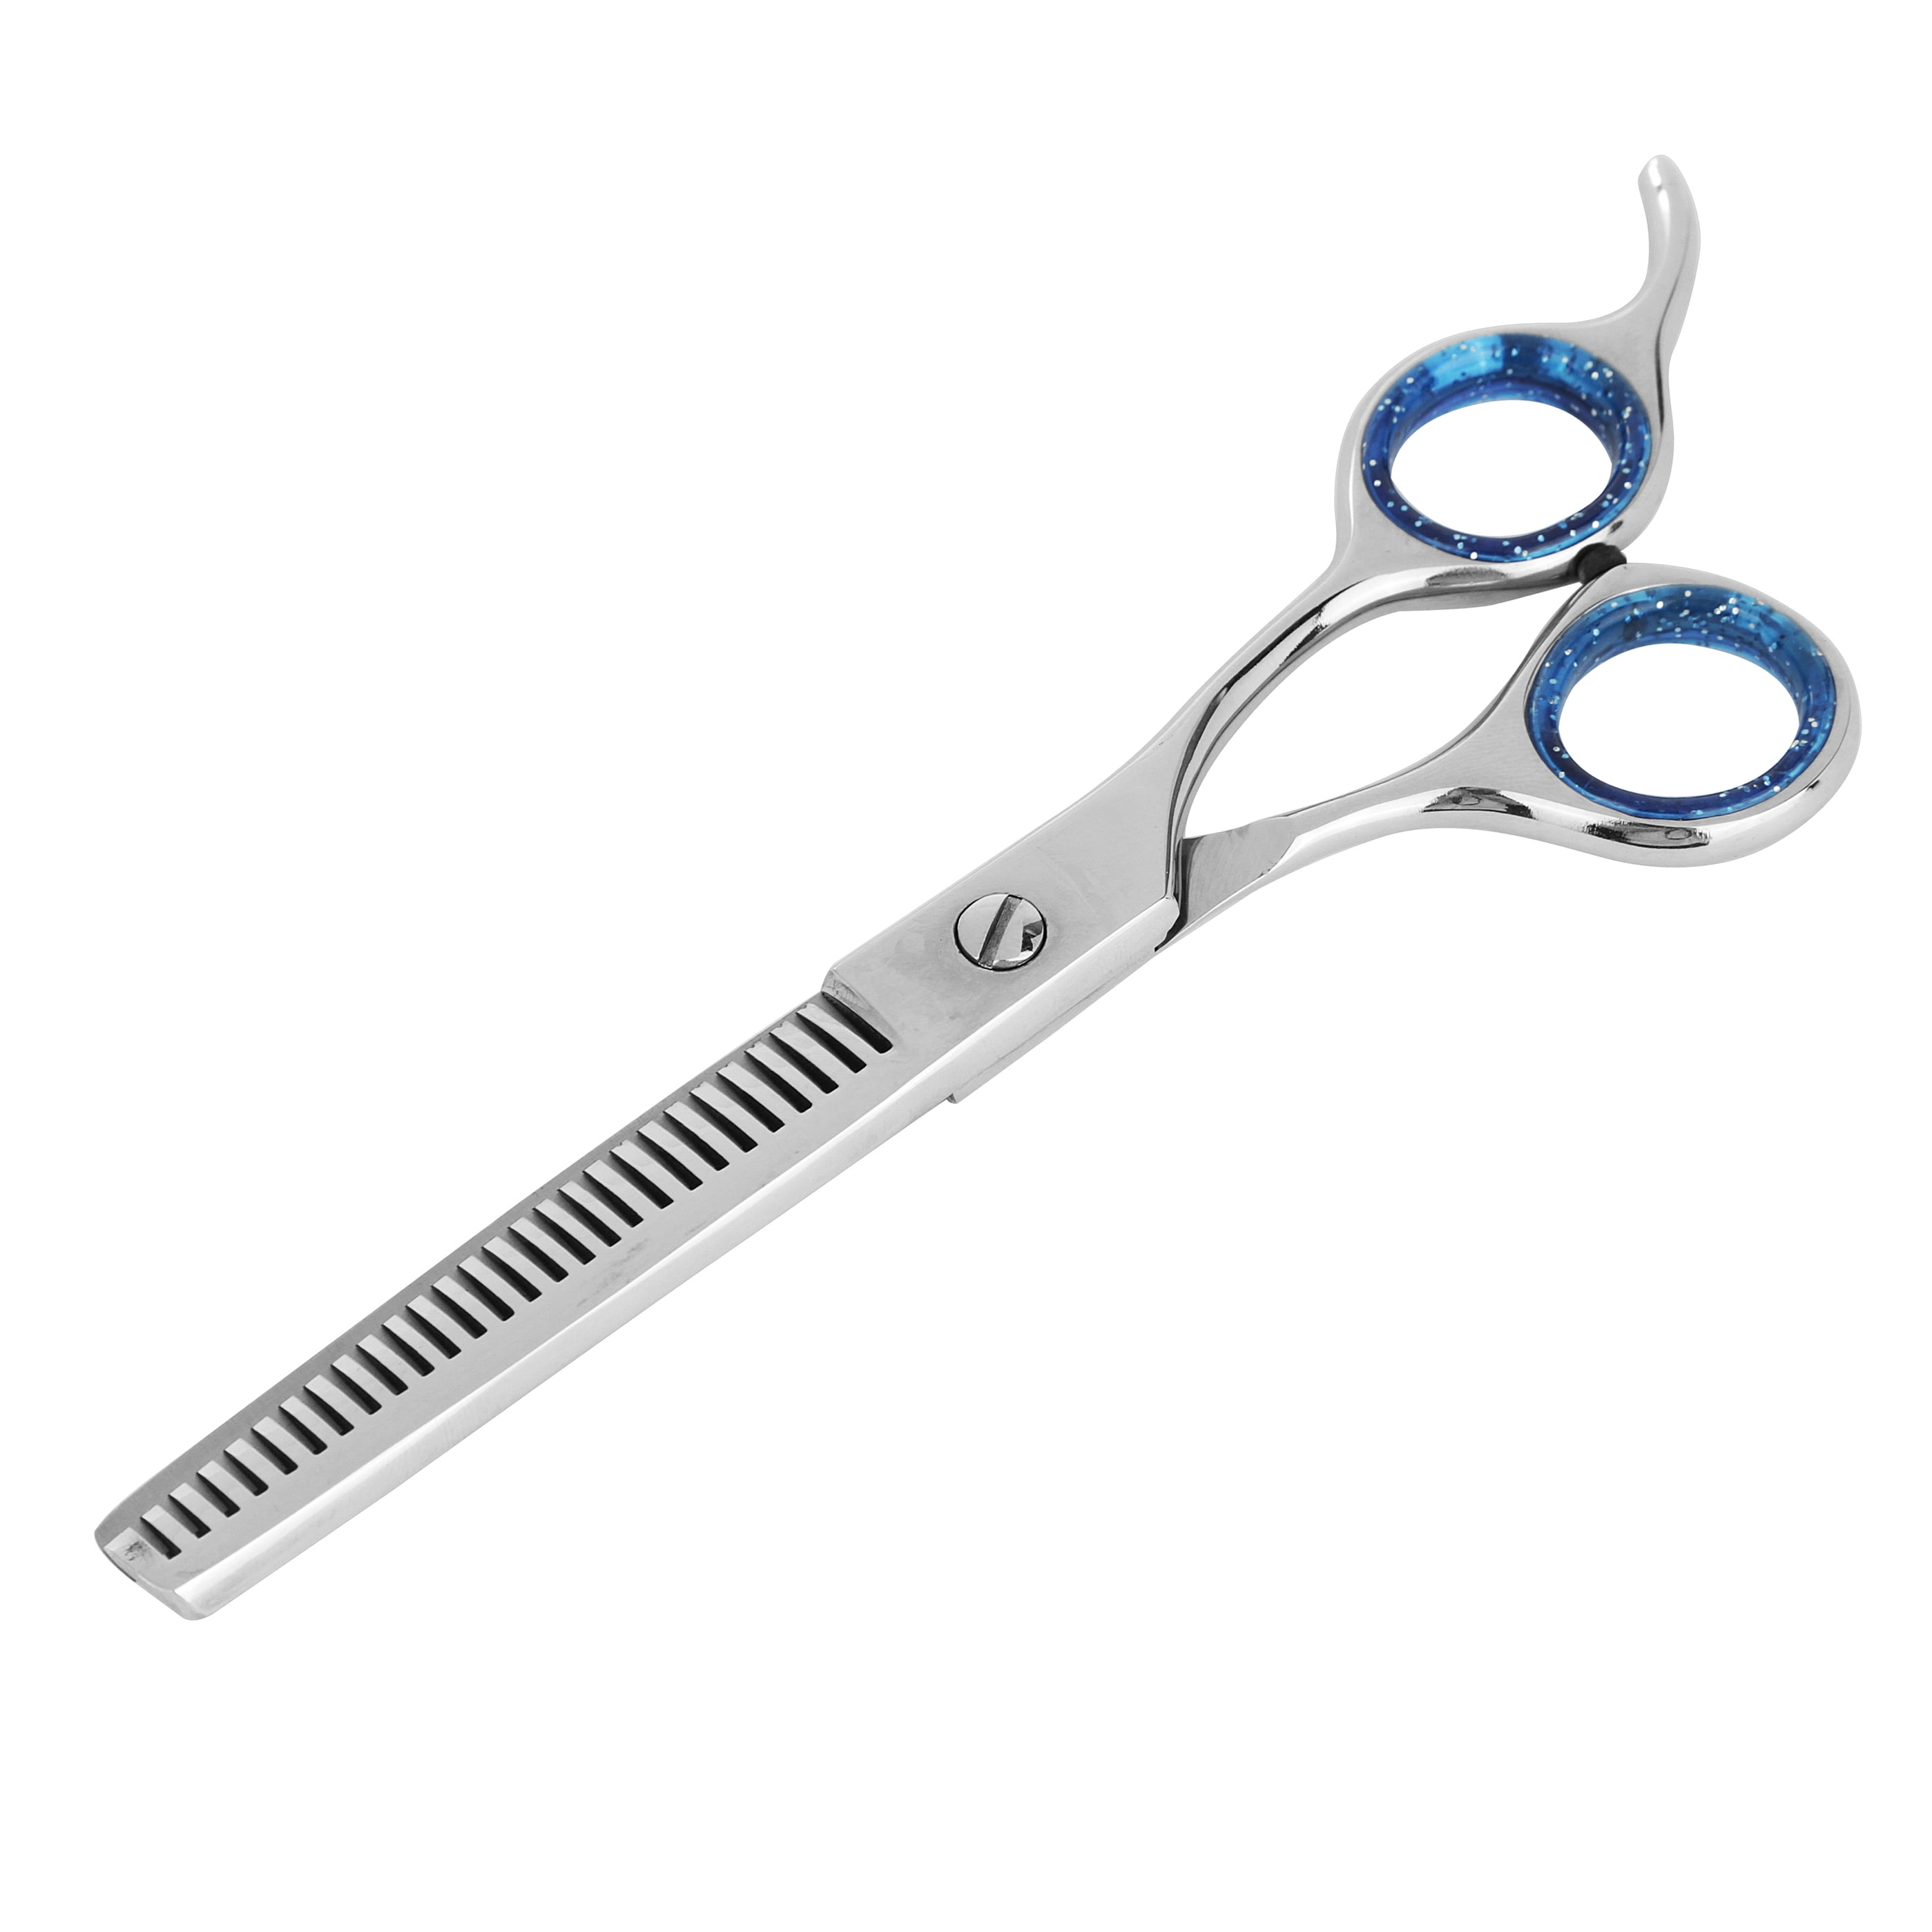 Barber Strong The Barber Shears, Japanese-Forged Stainless Steel Scissors, Adjustable Tension, Durable & Easy to Sharpen, Angled Thumb Ring for